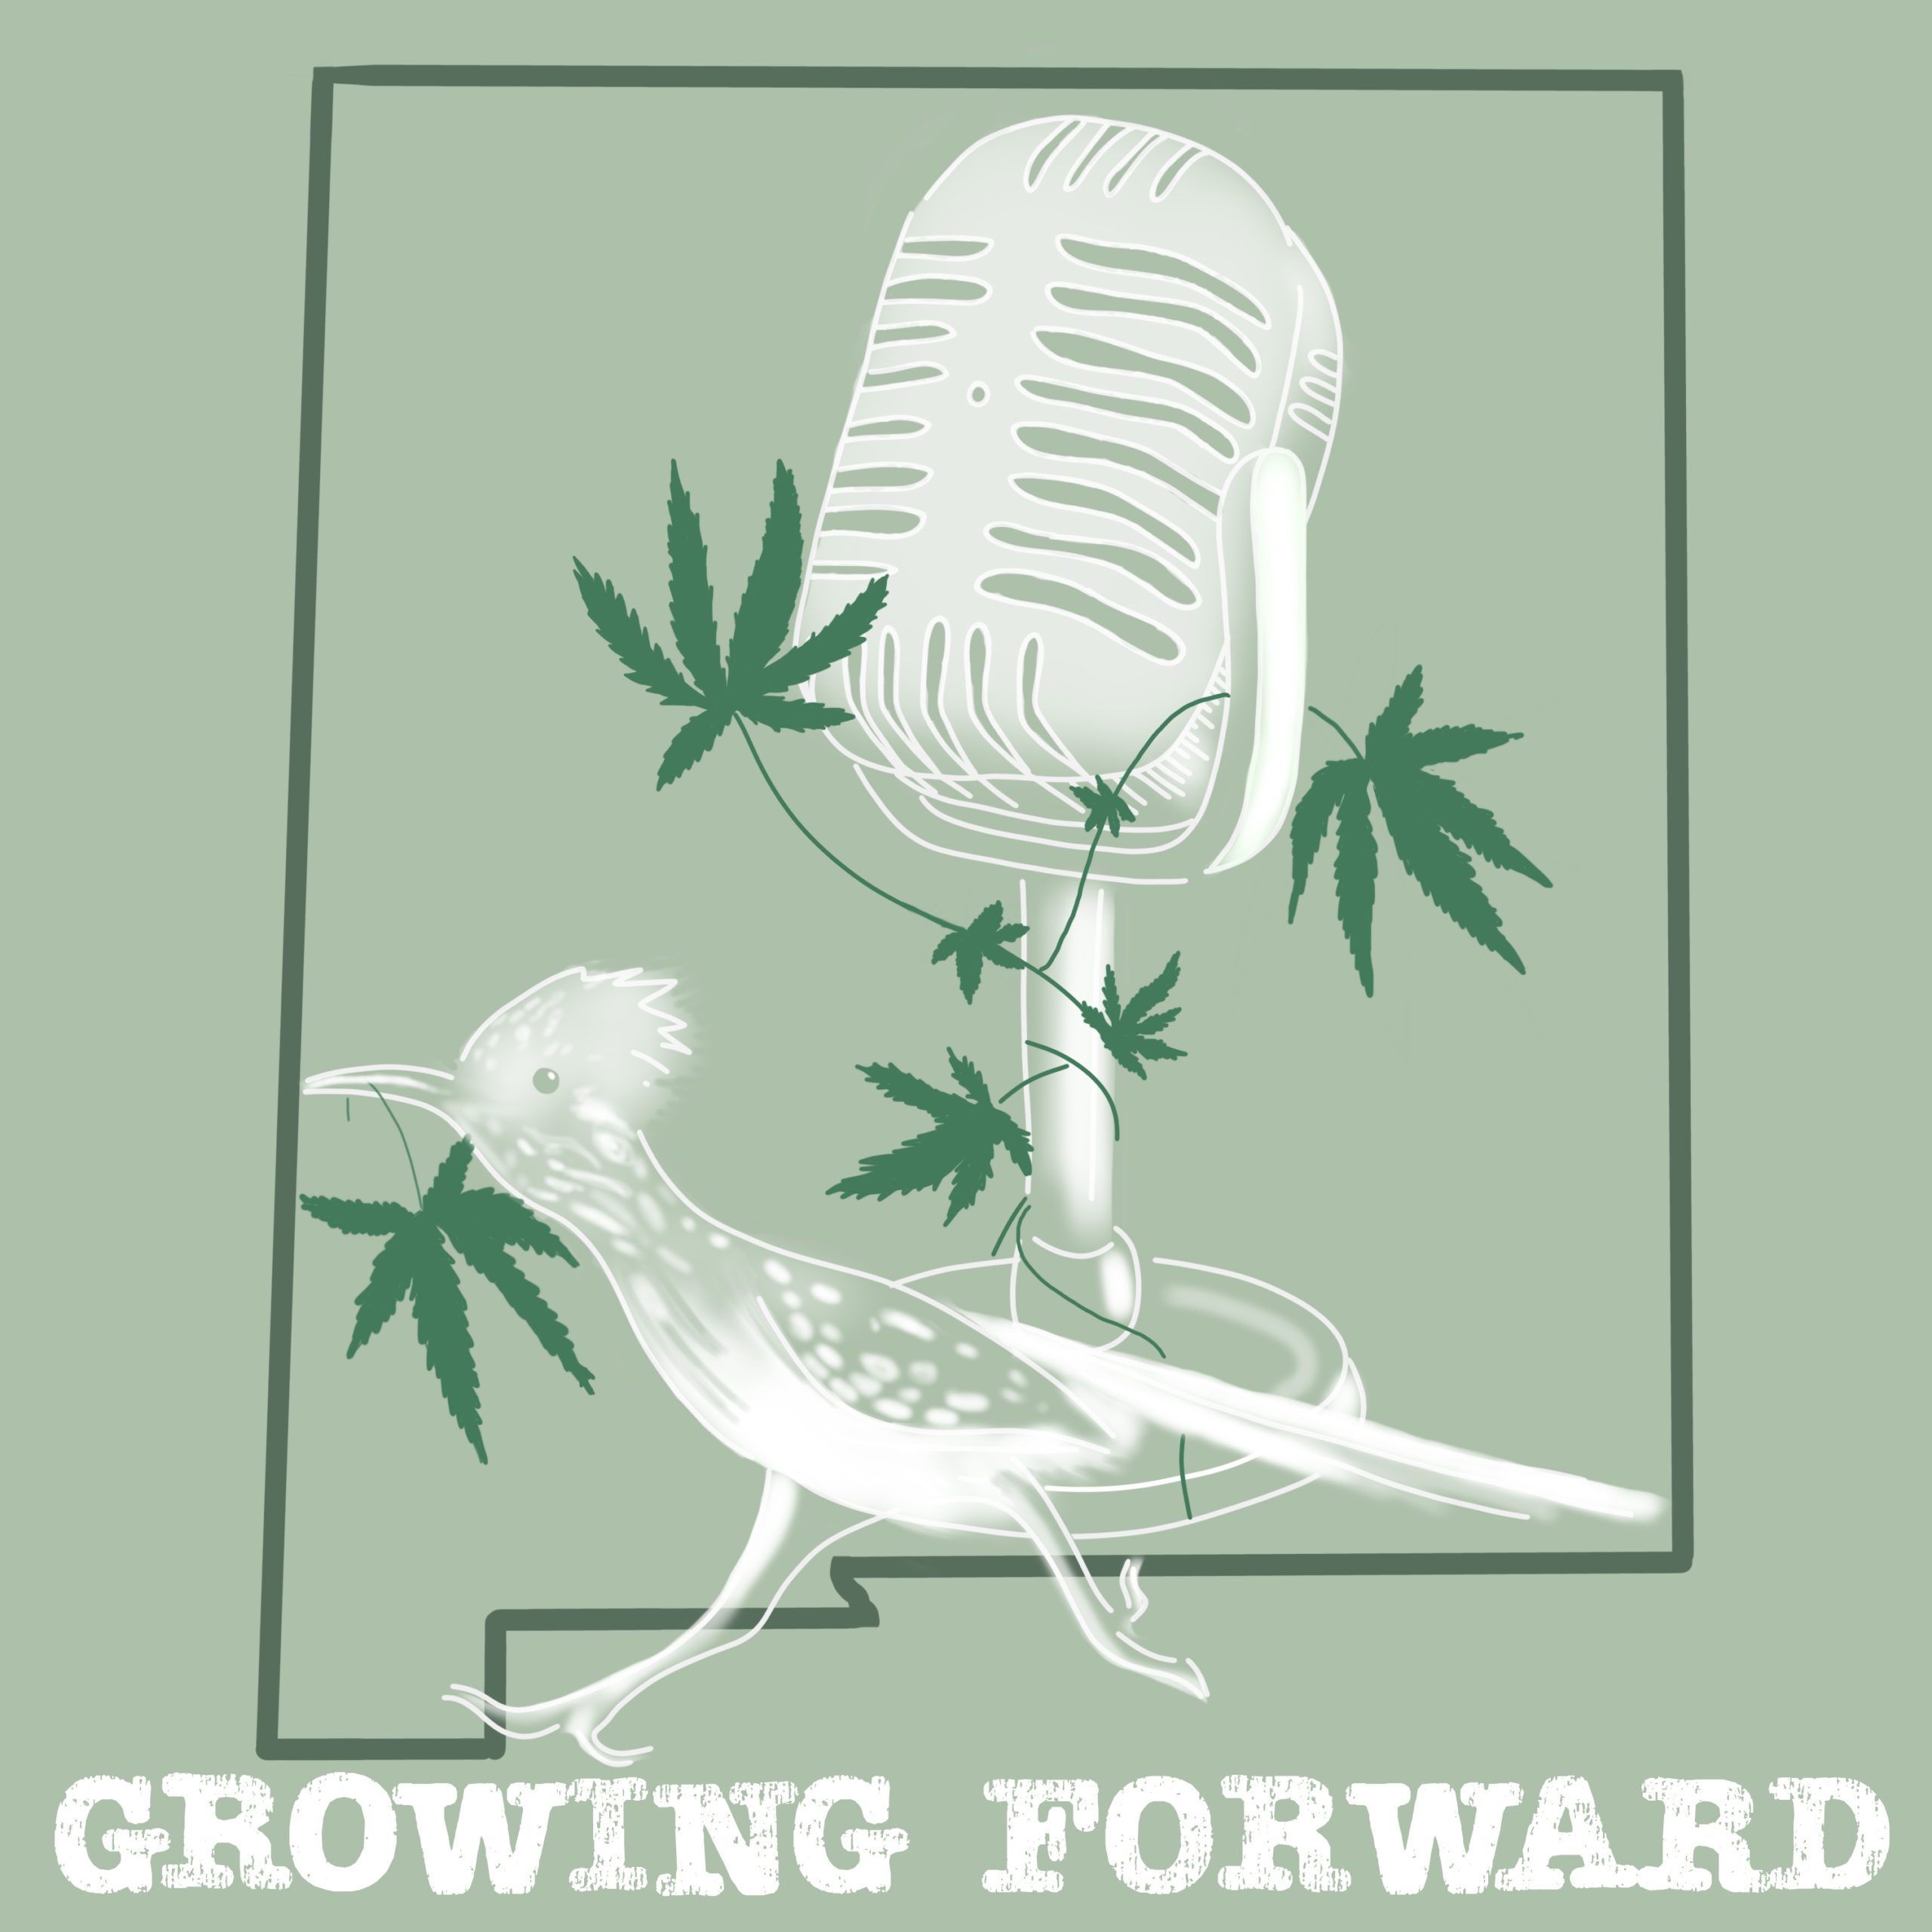 Growing Forward: Cannabis testing takes center stage